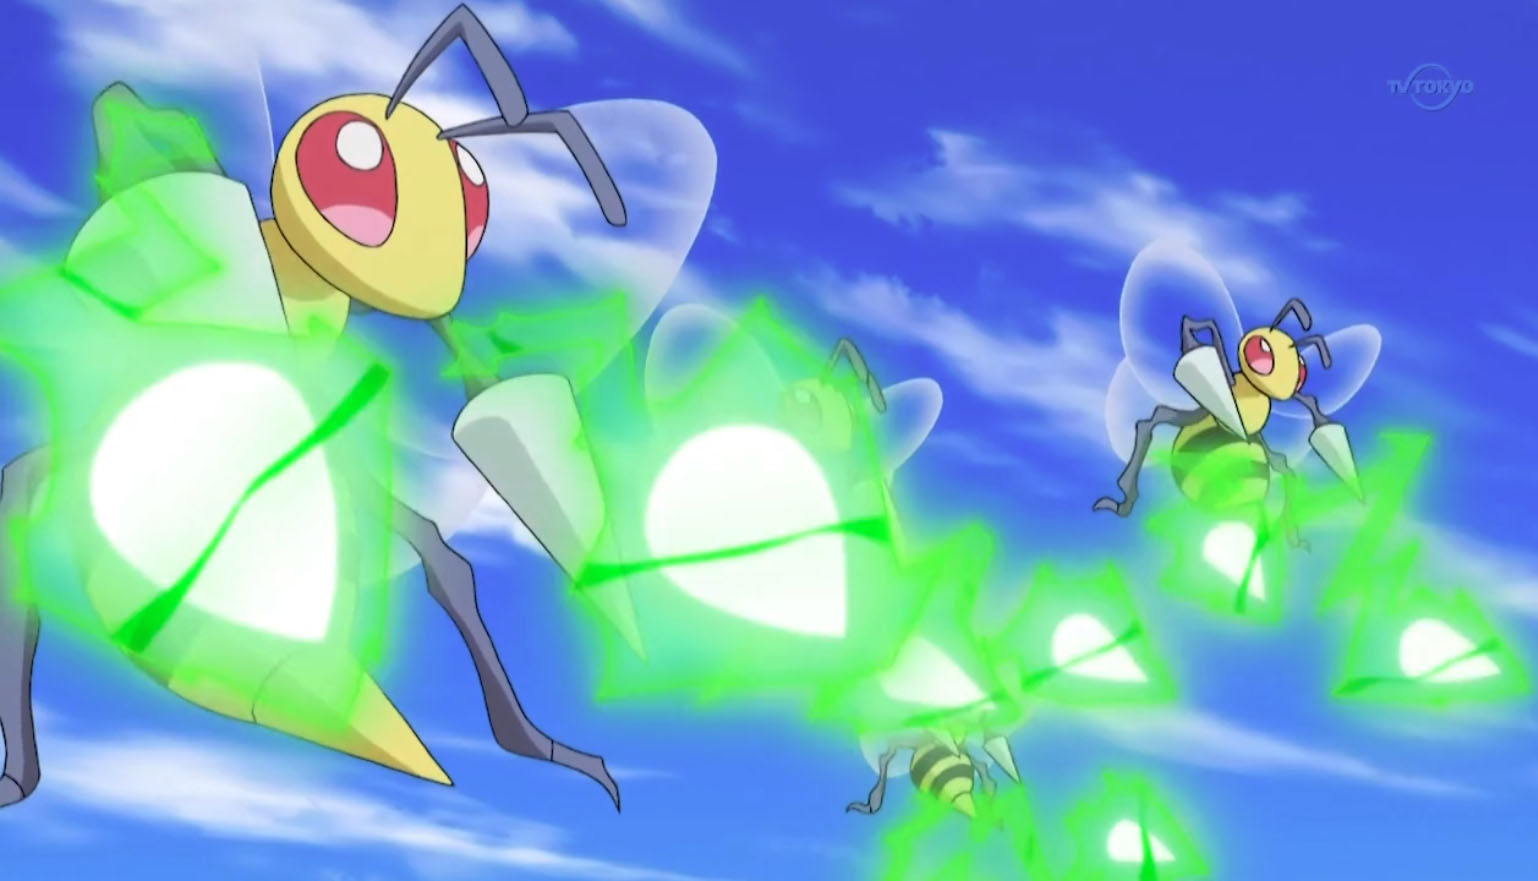 beedrill-used-pin-missile